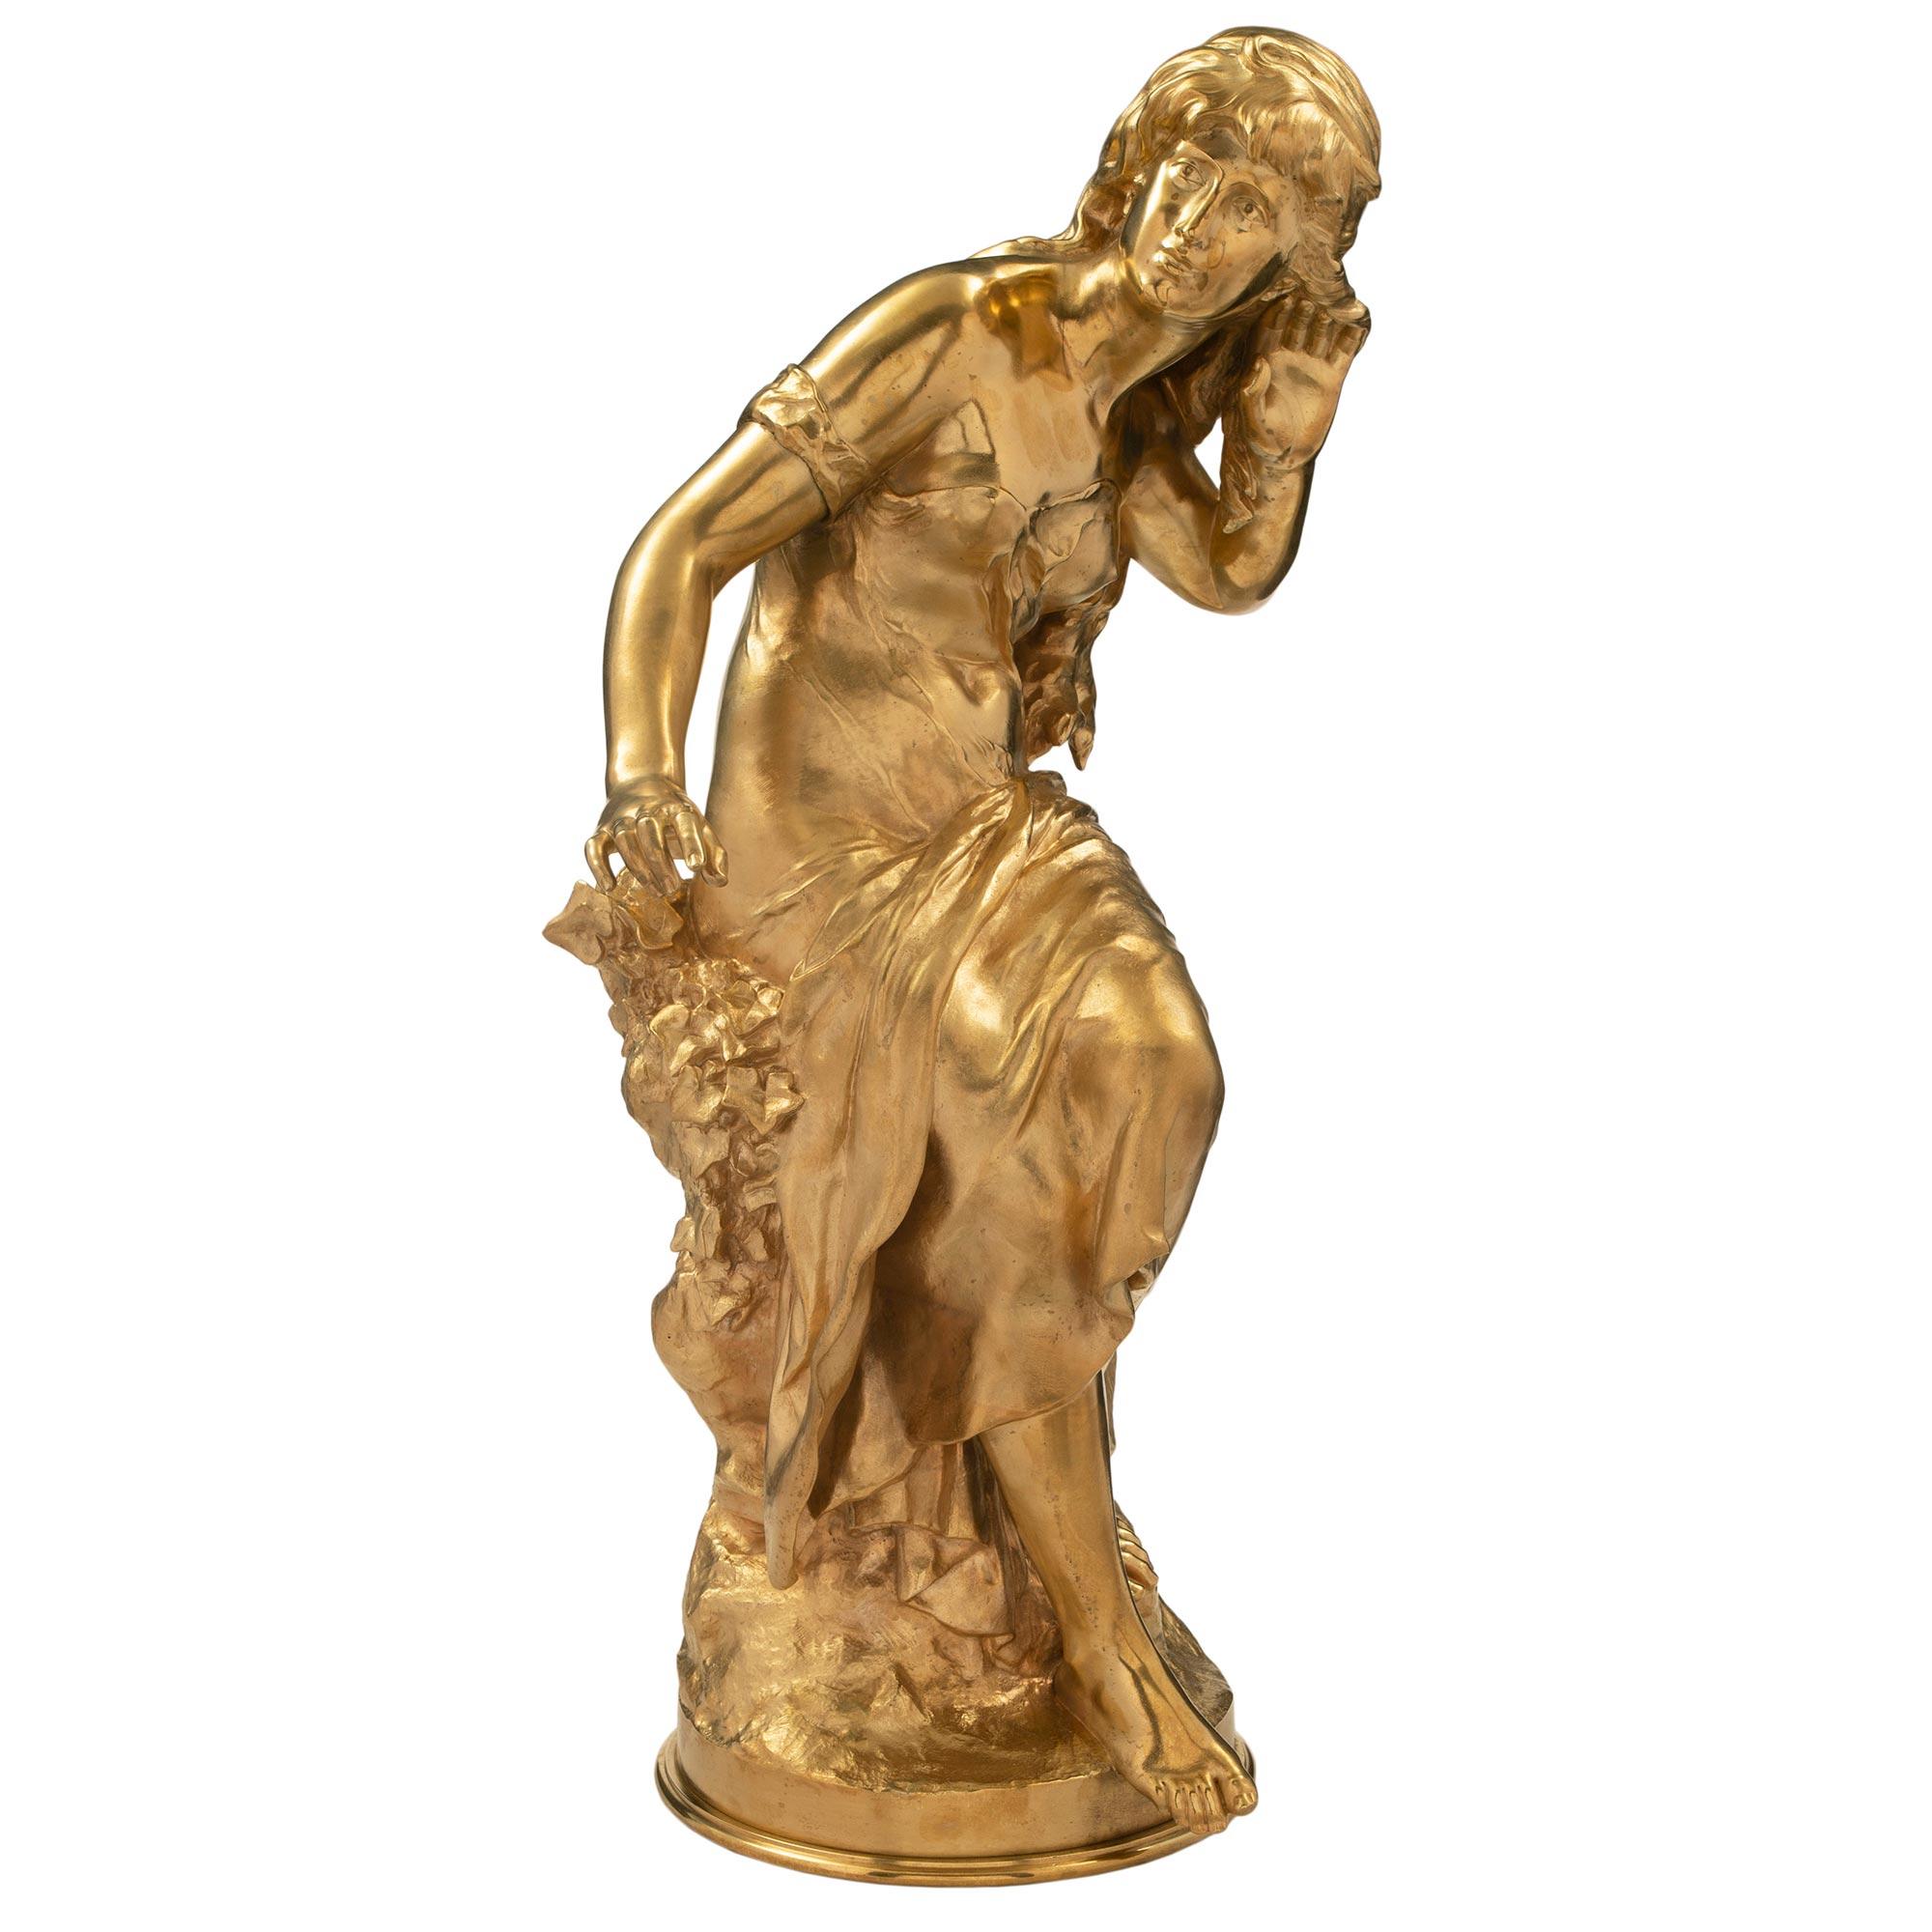 A superb and high quality French 19th Century Louis XVI st. ormolu statue of a lady sitting by the sea, signed by Mathurin Moreau. The beautiful statue is raised by a circular mottled band and a wonderfully executed rocklike design with fine